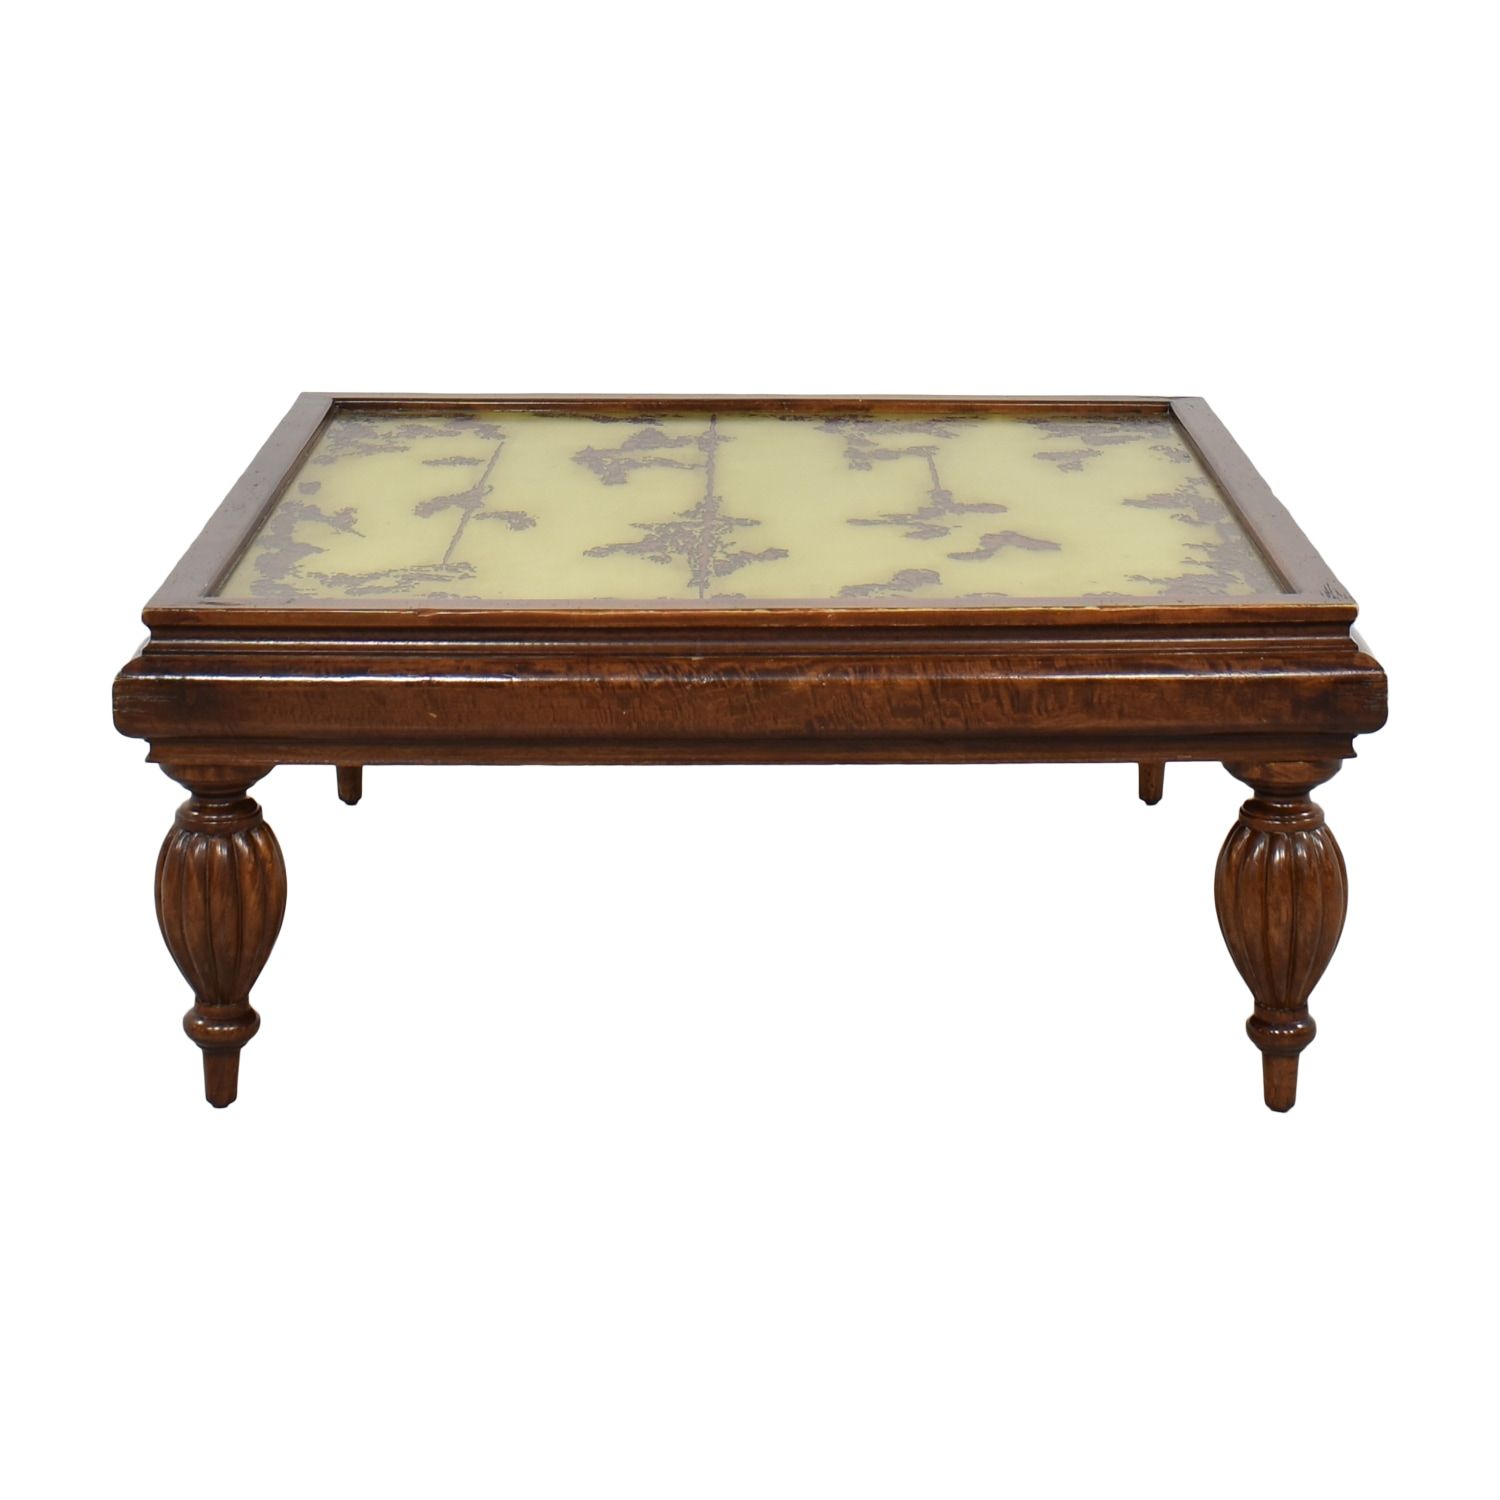 Uttermost Transitional Square Coffee Table | 88% Off | Kaiyo In Transitional Square Coffee Tables (View 7 of 15)